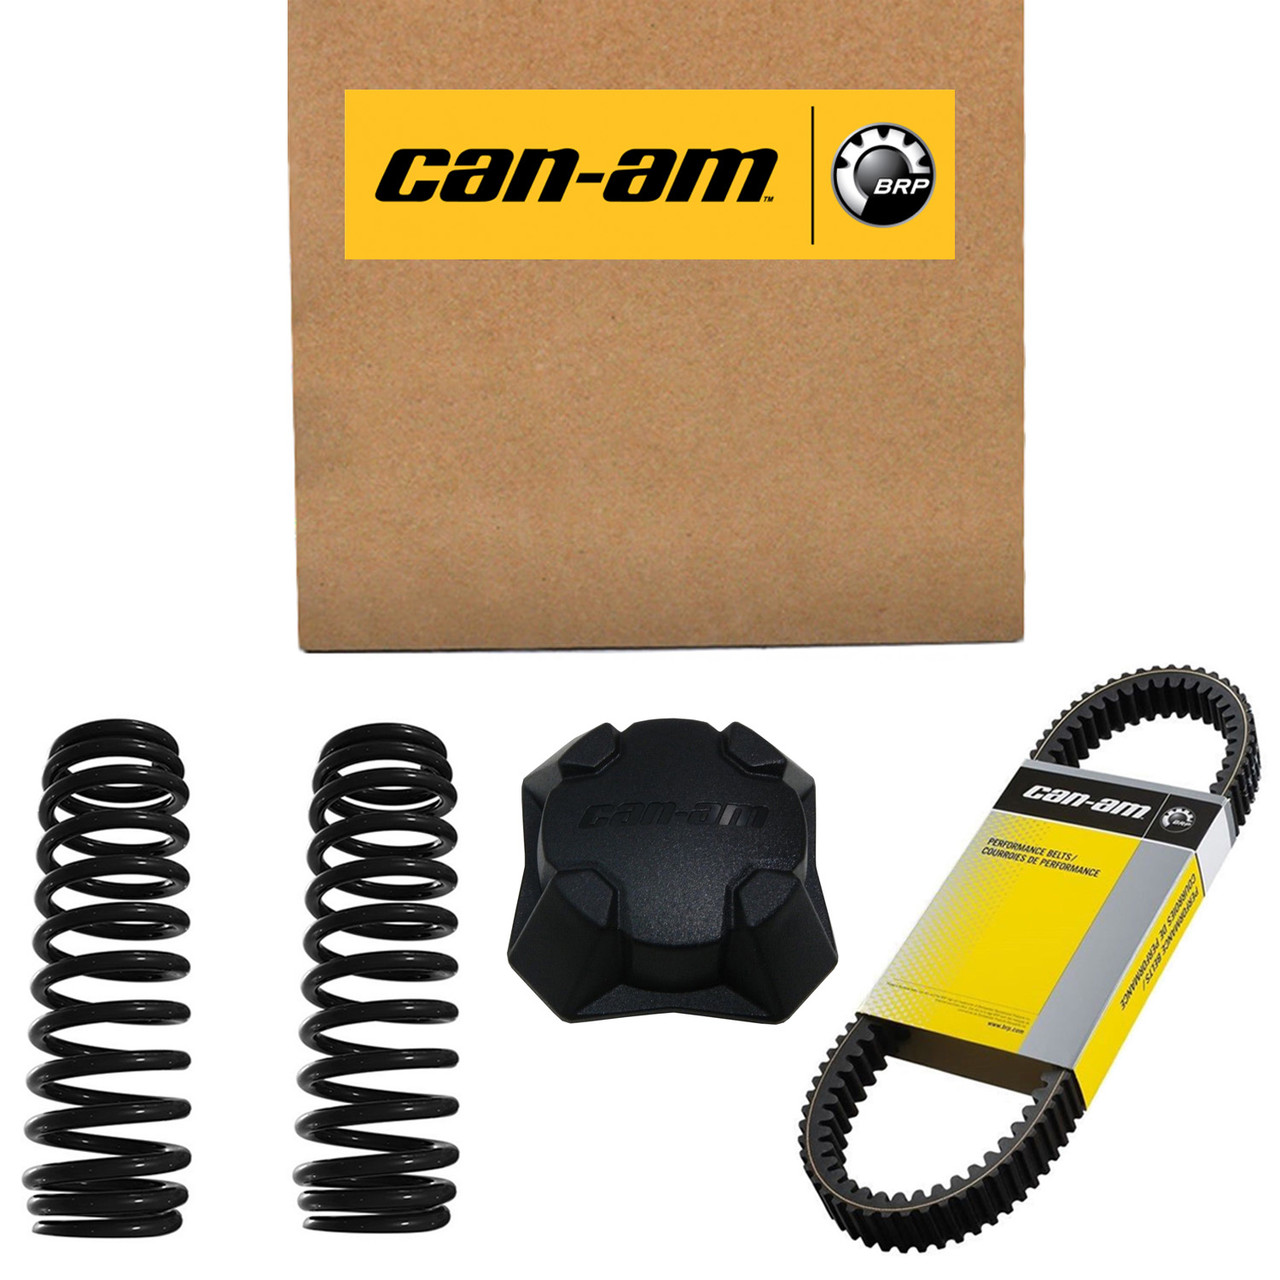 Can-Am New OEM Machined Tensionner, 504153559